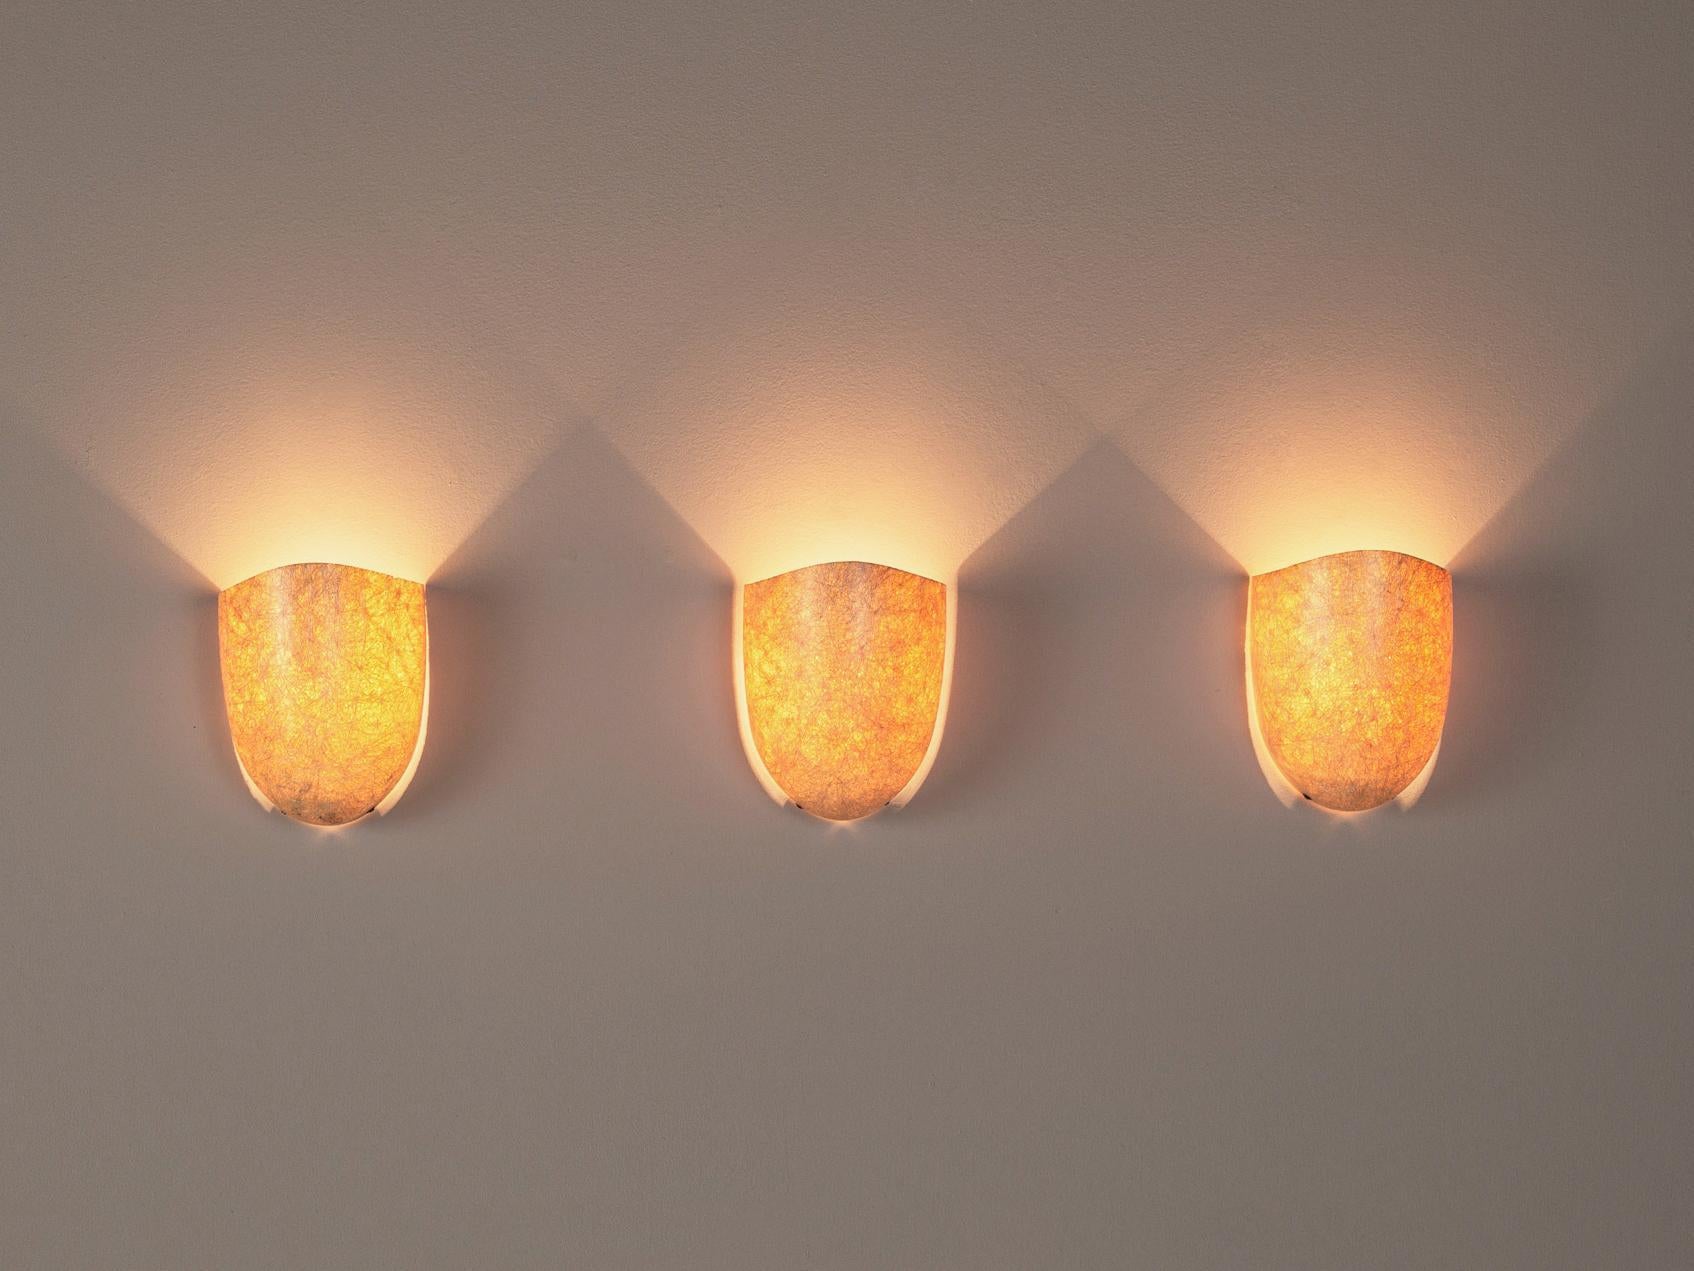 Philips, wall sconces, metal, fiberglass, the Netherlands 1970s.

Artistic wall lights of the seventies that embody a nice textured surface of intersecting lines. As a consequence, a transparent and atmospheric light is created. A simple design